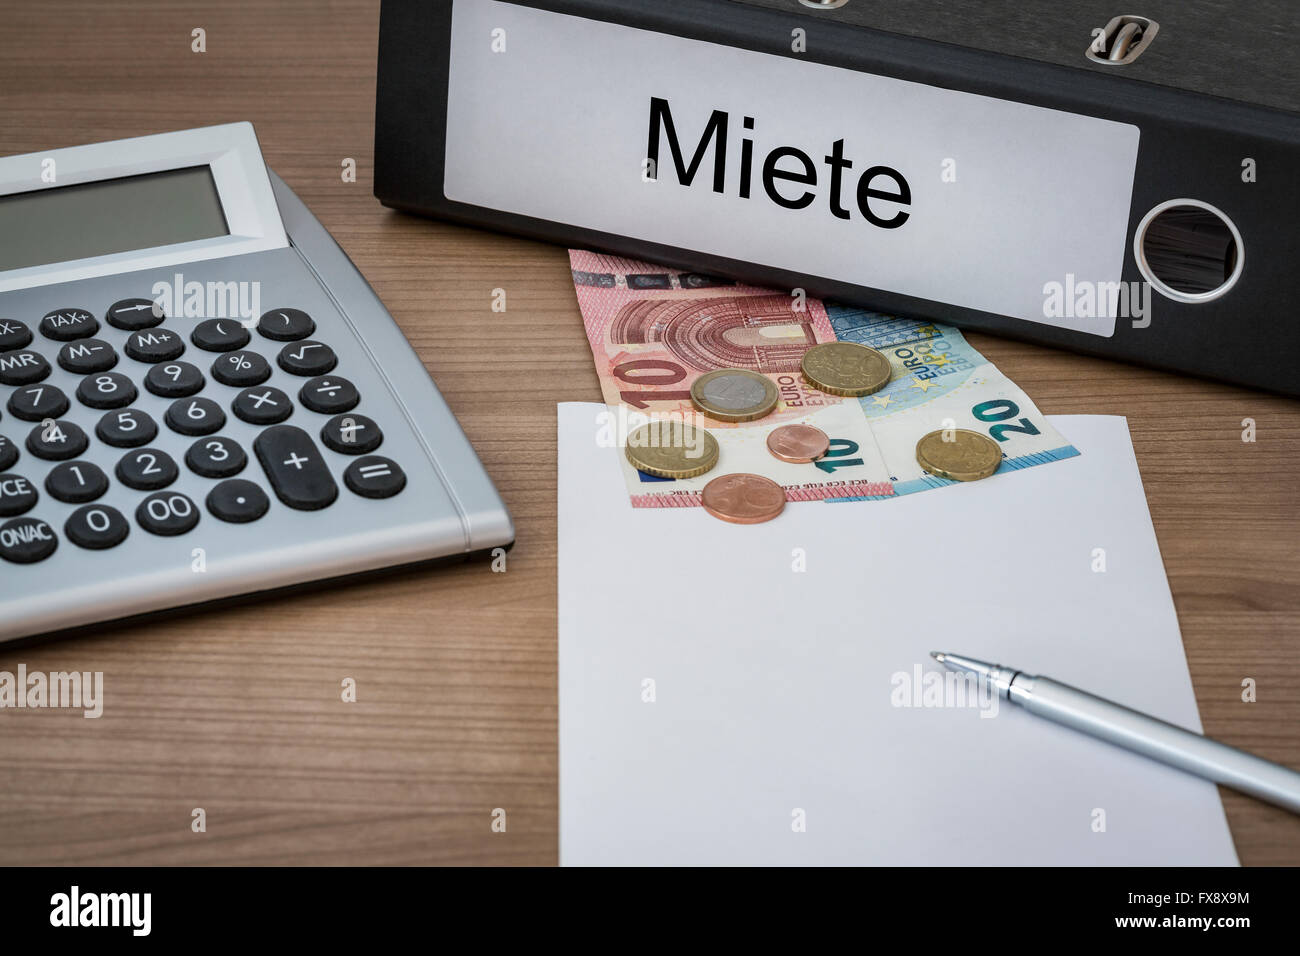 Miete (german Rent) written on a binder on a desk with euro money calculator blank sheet and pen Stock Photo